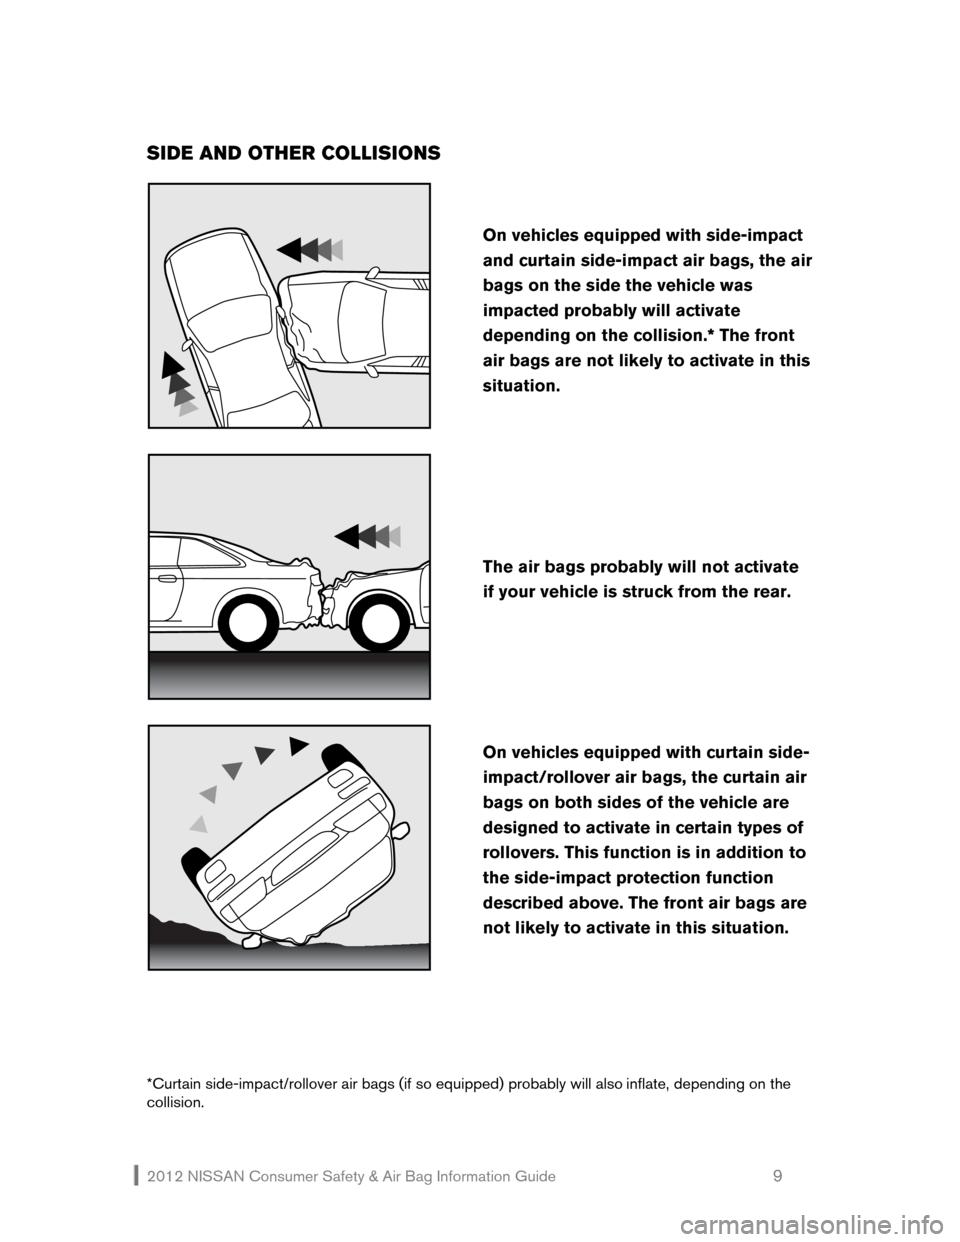 NISSAN NV200 2012 1.G Consumer Safety Air Bag Information Guide 2012 NISSAN Consumer Safety & Air Bag Information Guide                                                   9 
SIDE AND OTHER COLLISIONS 
 
 
 
 
 
*Curtain side-impact/rollover air bags (if so equipped